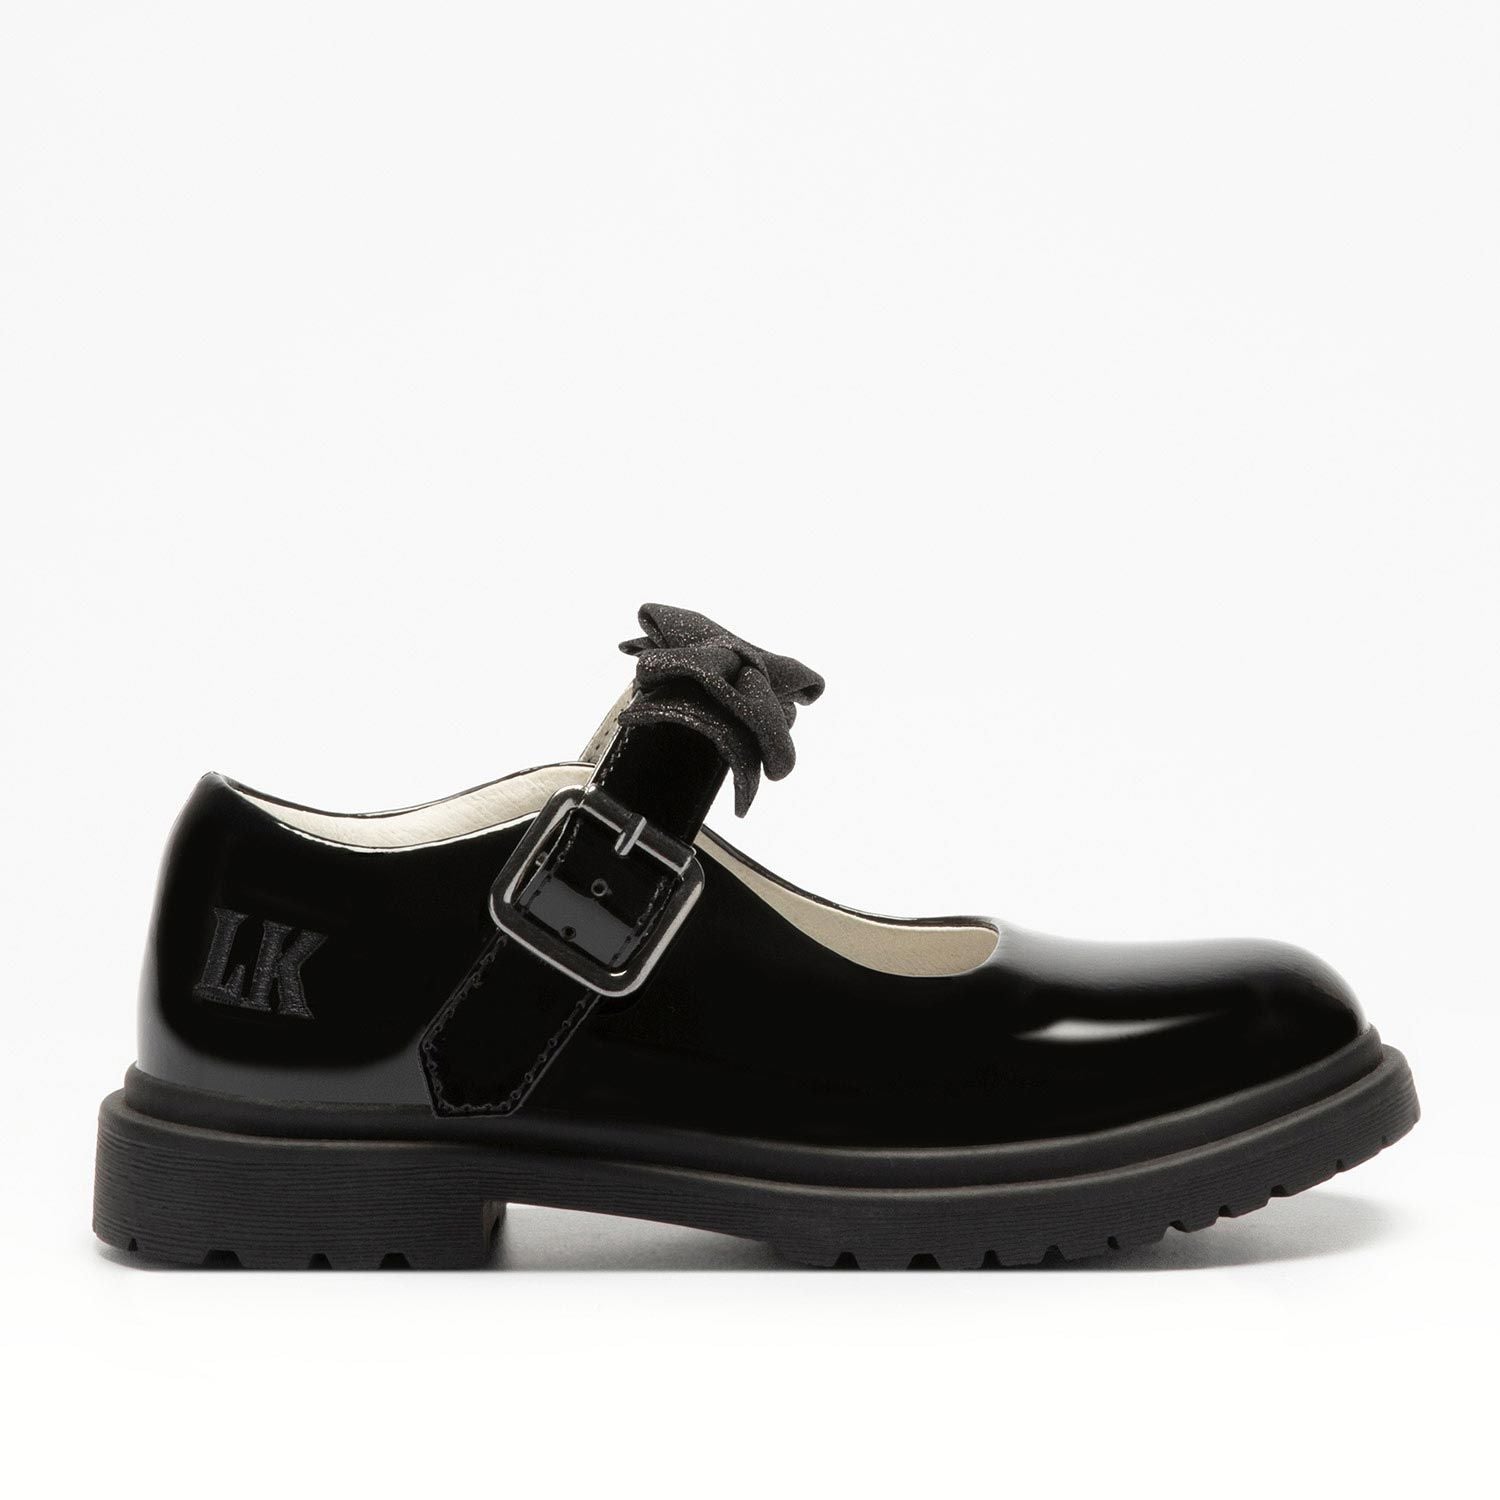 A girls chunky Mary Jane school shoe by Lelli Kelly, style LK8359 Mollie, in black patent leather with buckle fastening and detachable fabric bow. Right side view.